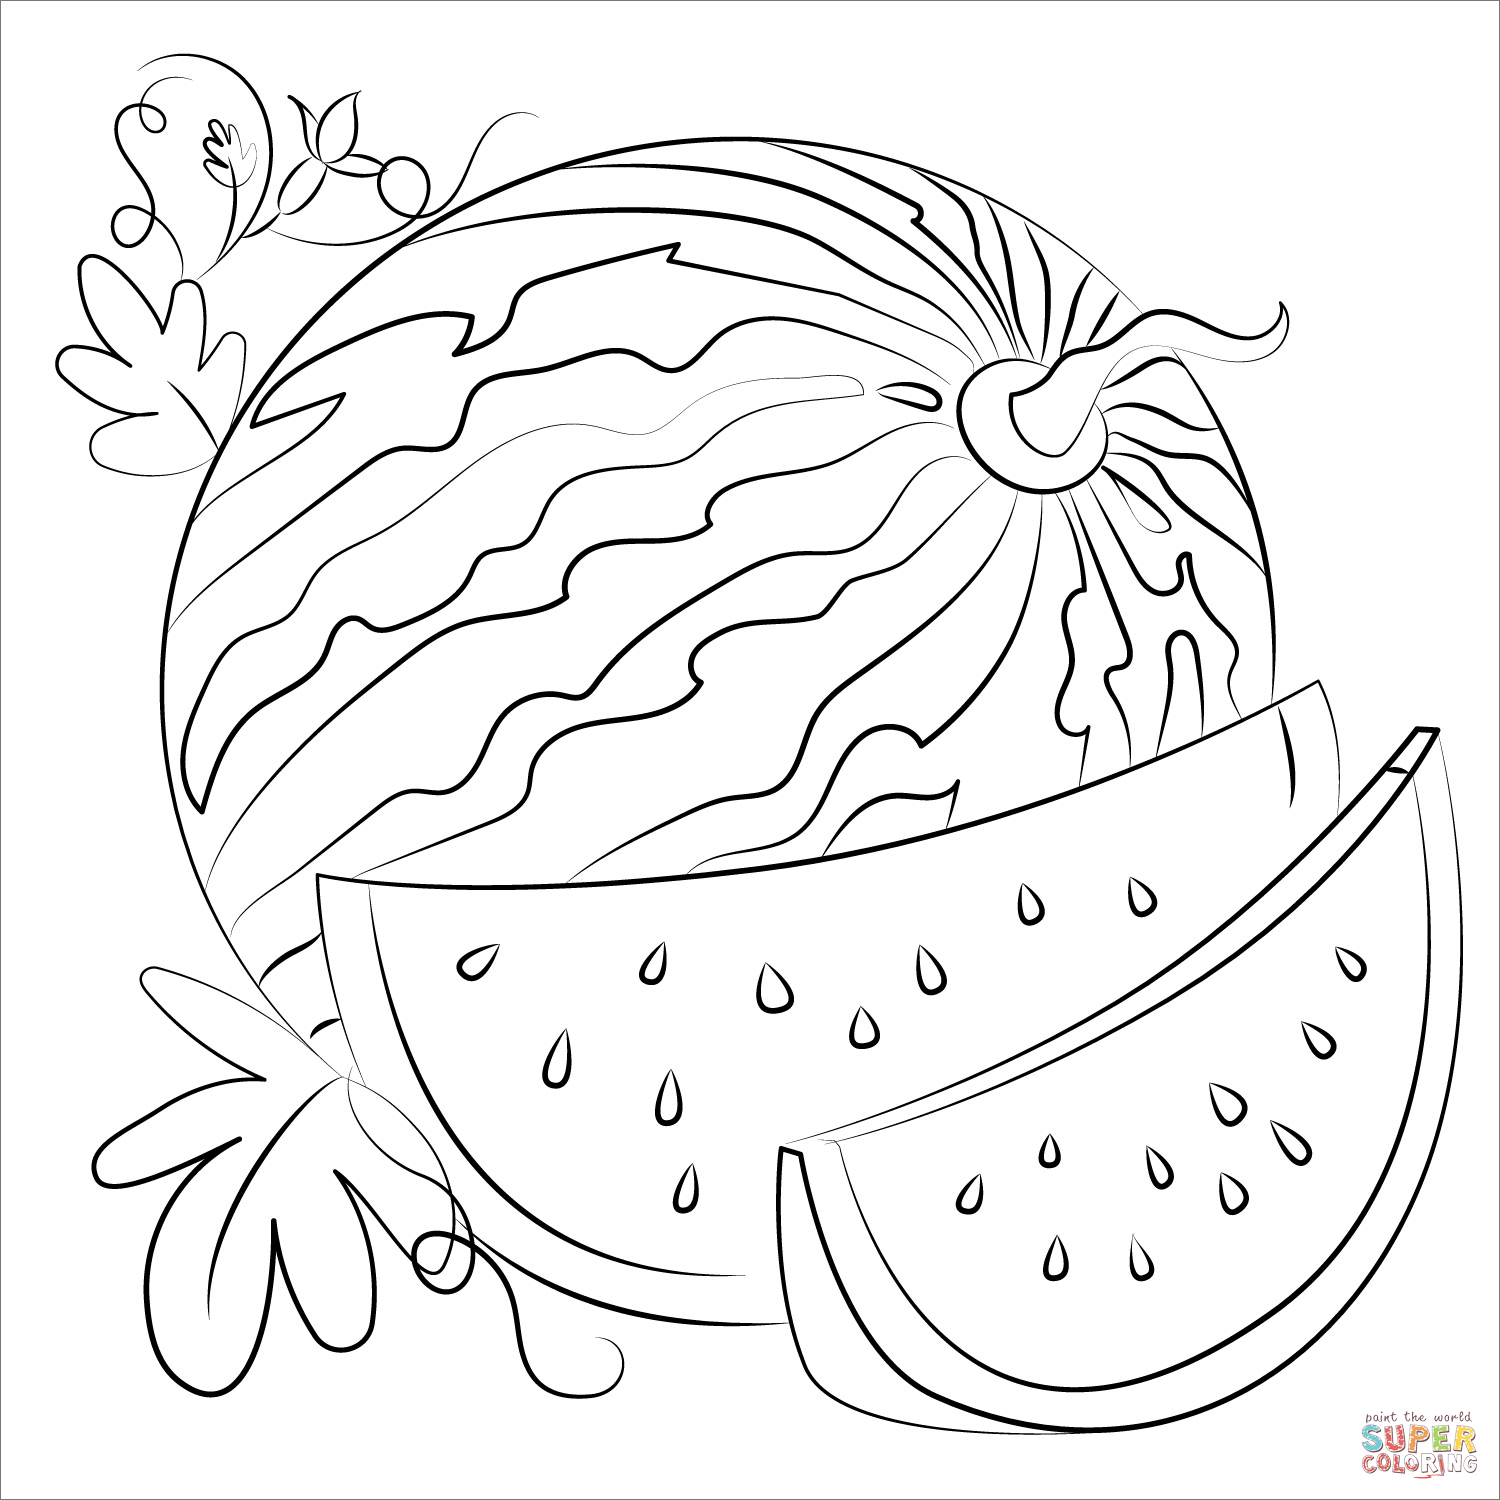 Watermelon coloring page free printable coloring pages